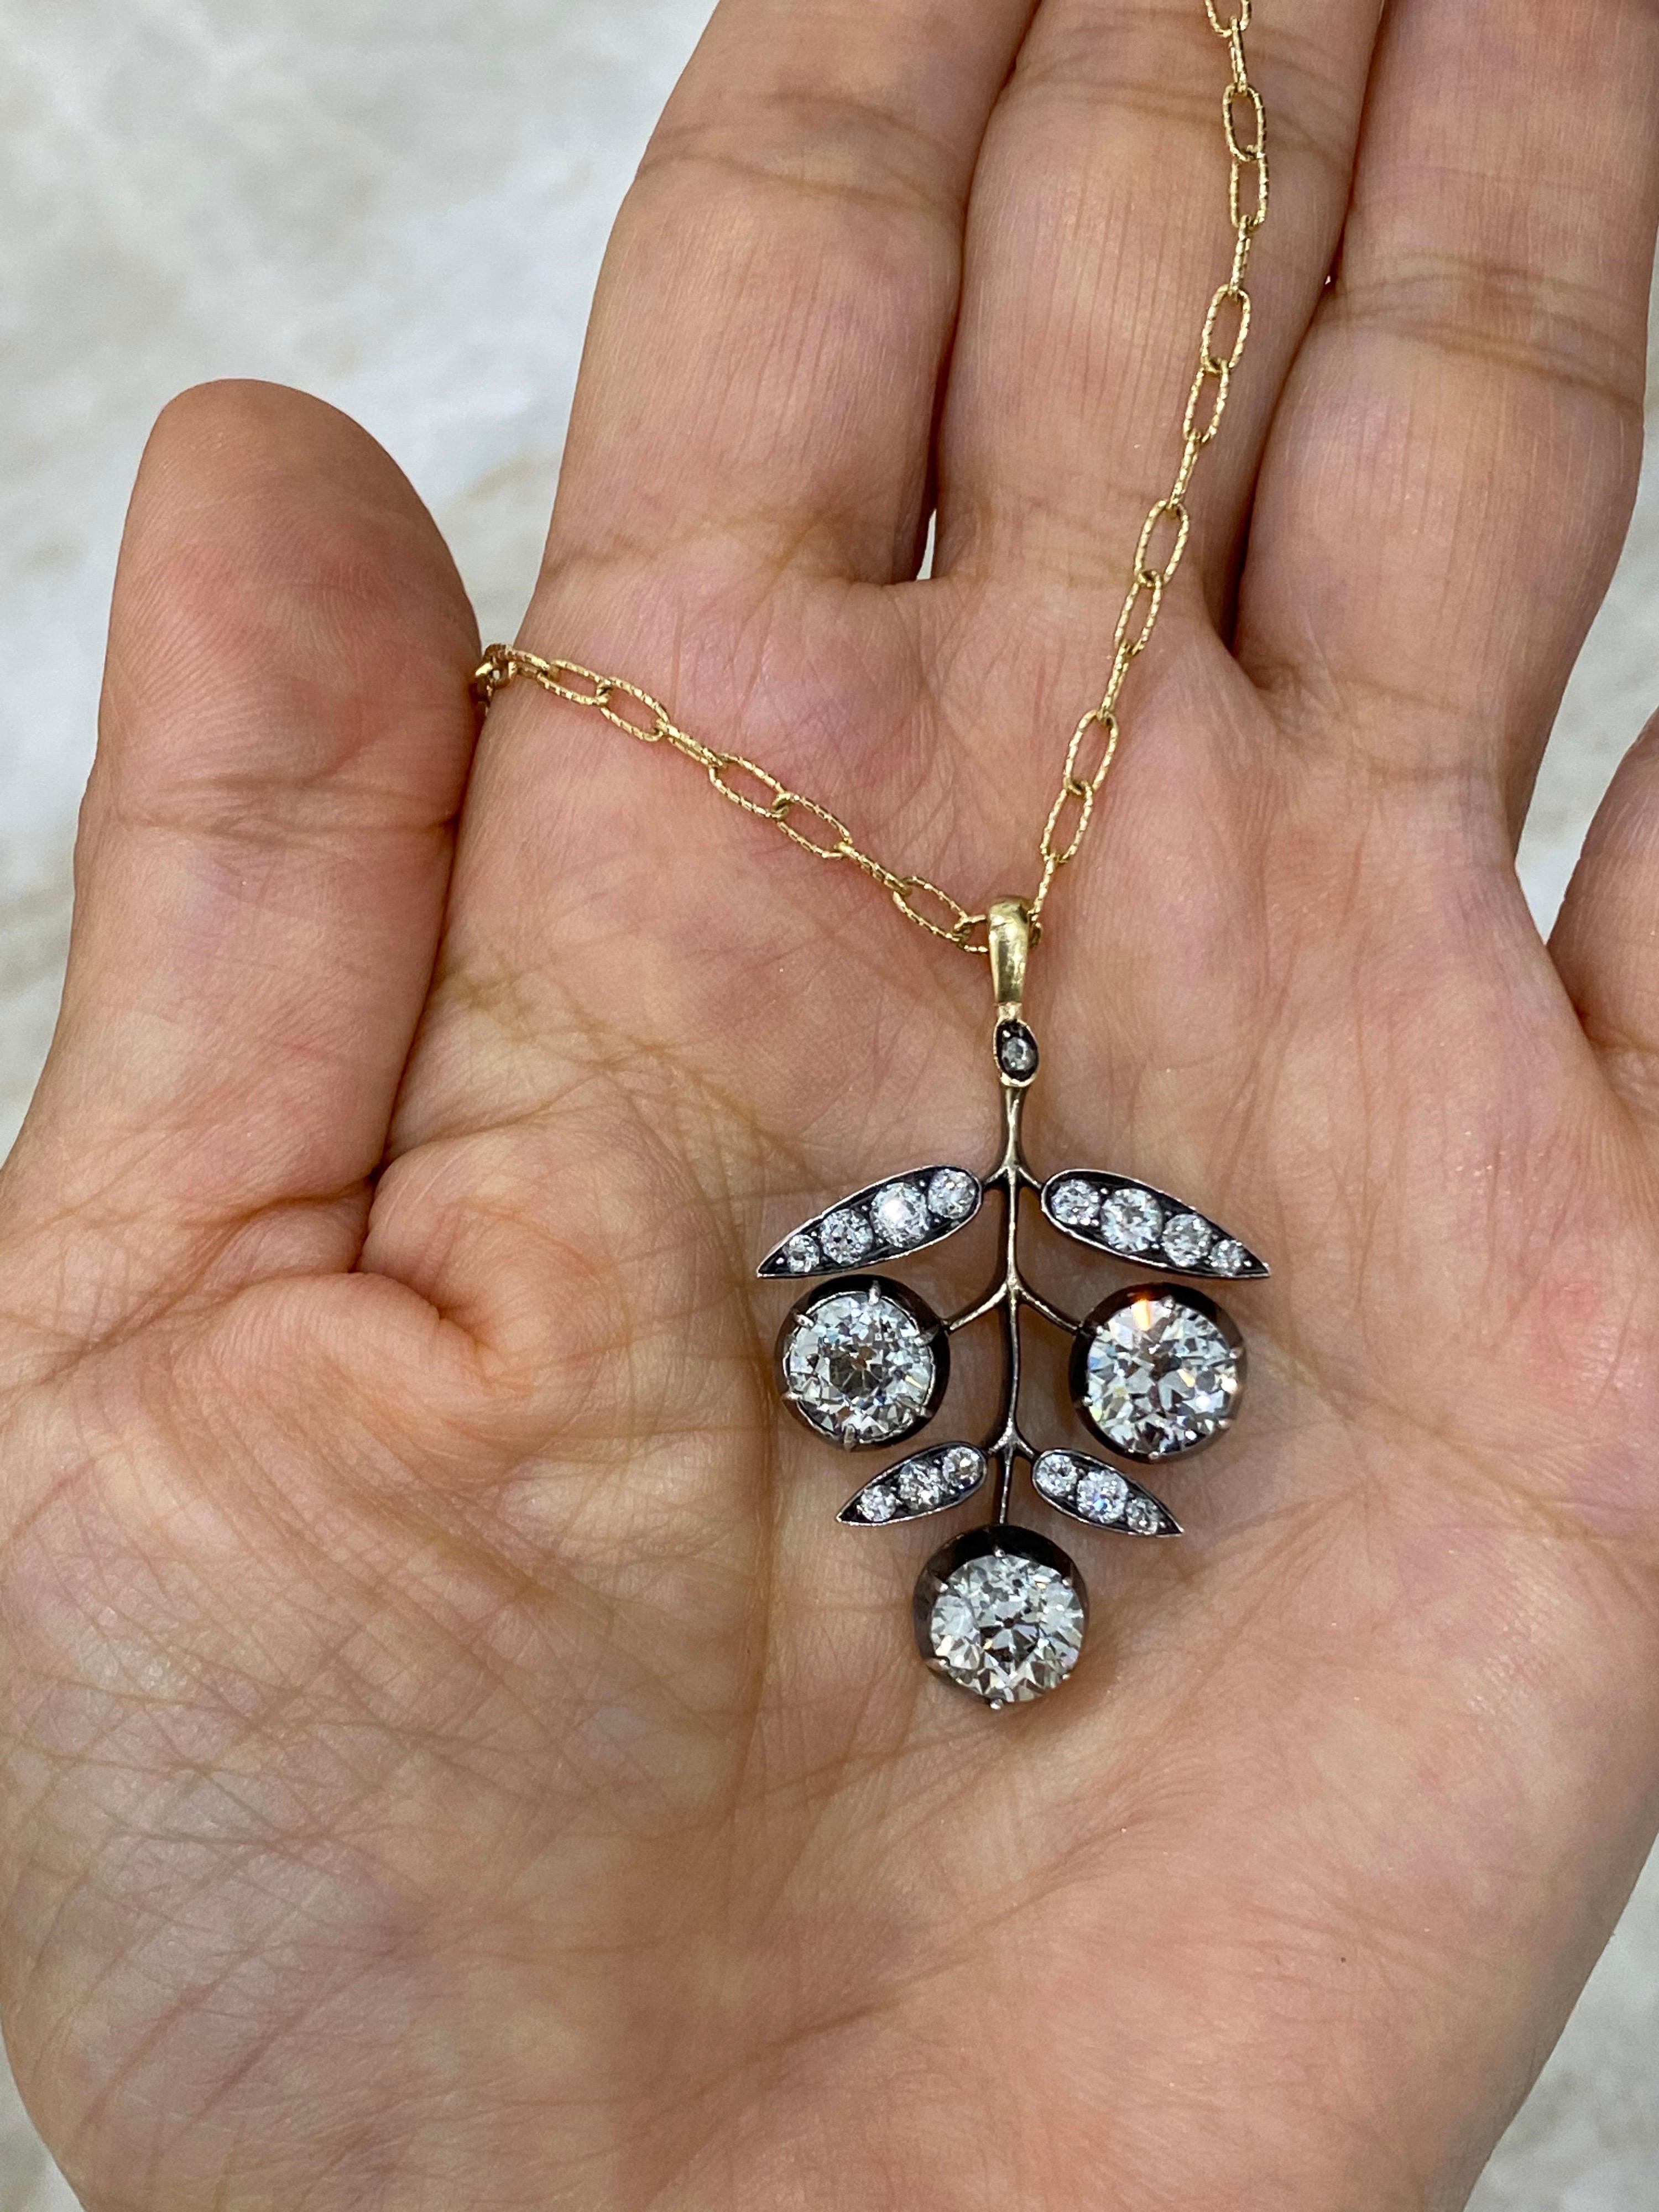 This incredible necklace is a show stopper! Set in silver backed in yellow gold true to the Victorian period. 
3 large old European diamonds= Approx.4.15 Carat.
I-J, VS2. ( approx 1.30+ carat each)
Additionally:
14 graduated old European diamonds &